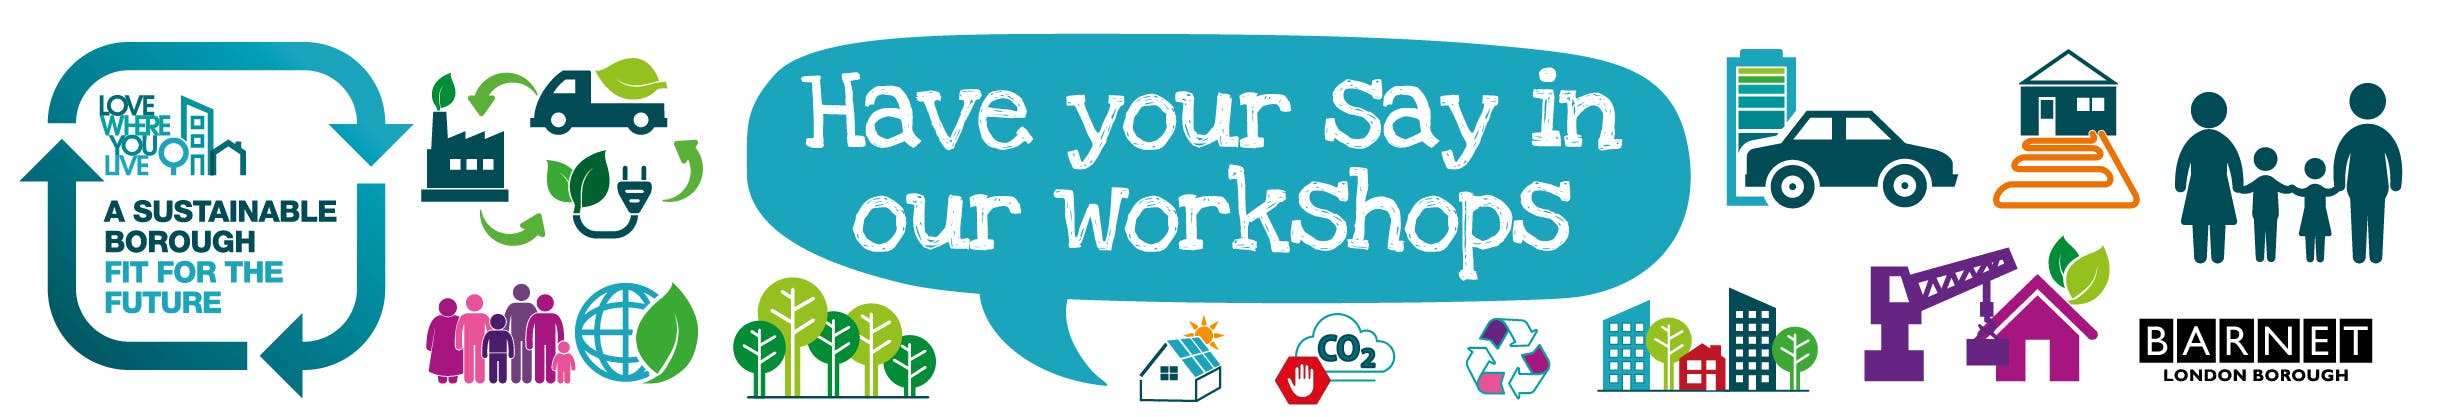 Image saying have your say by taking part in our Sustainable Strategy workshops